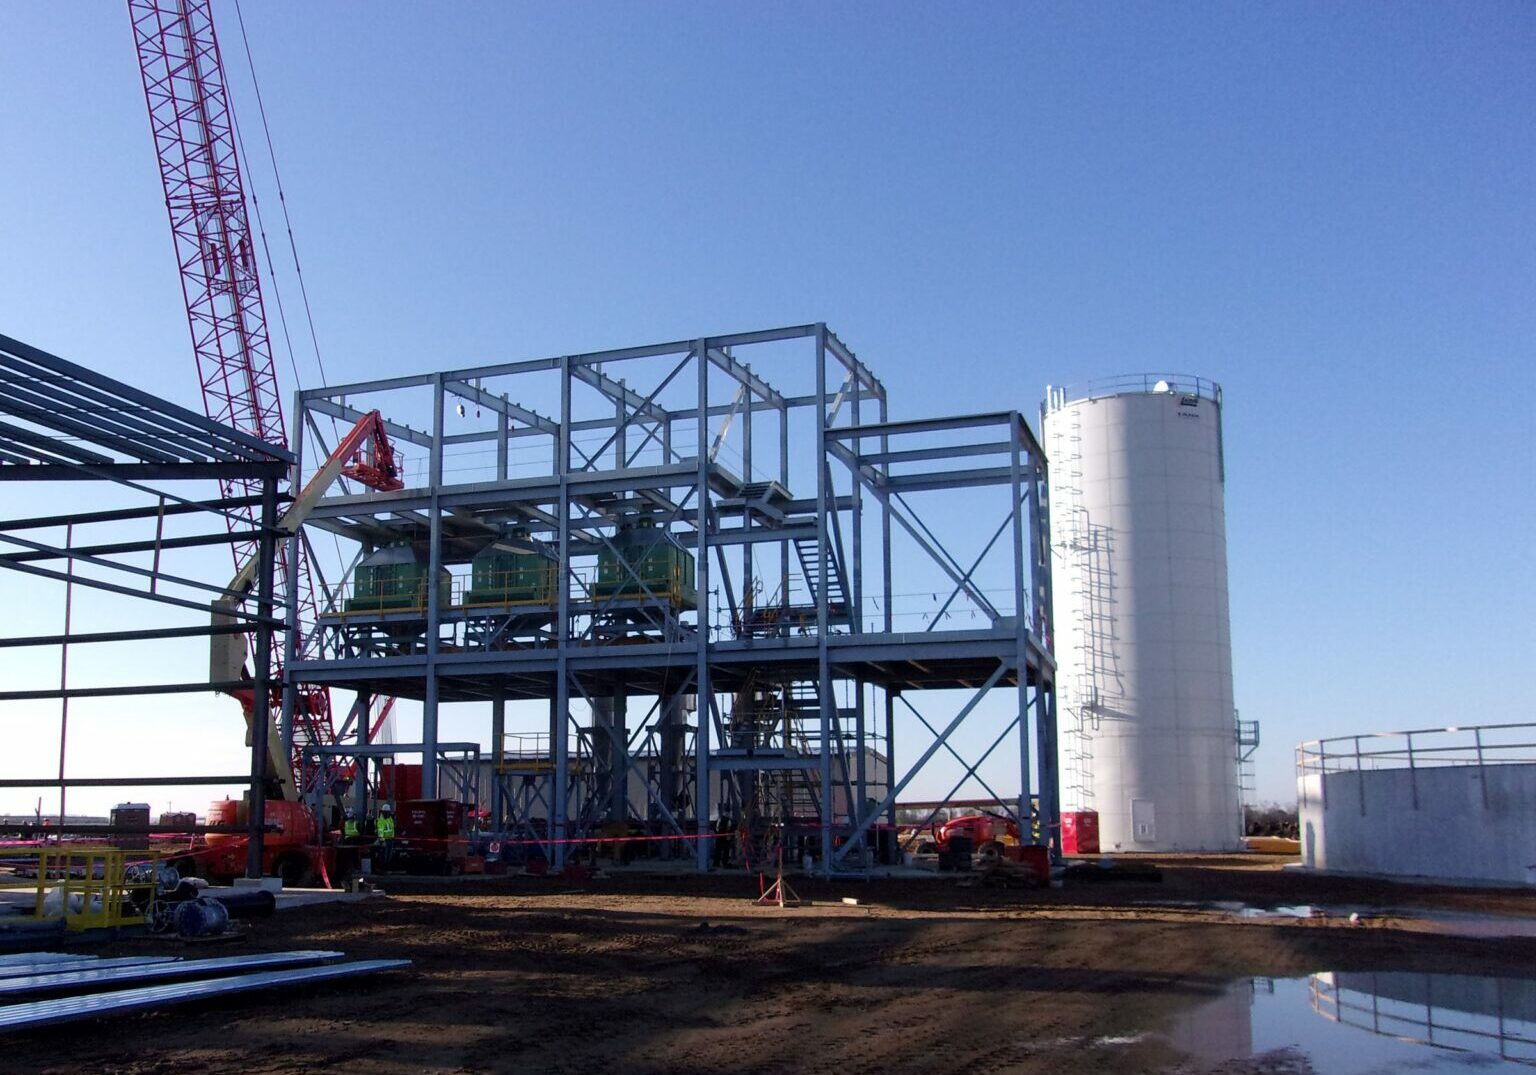 Construction of a protein enhancement facility in process